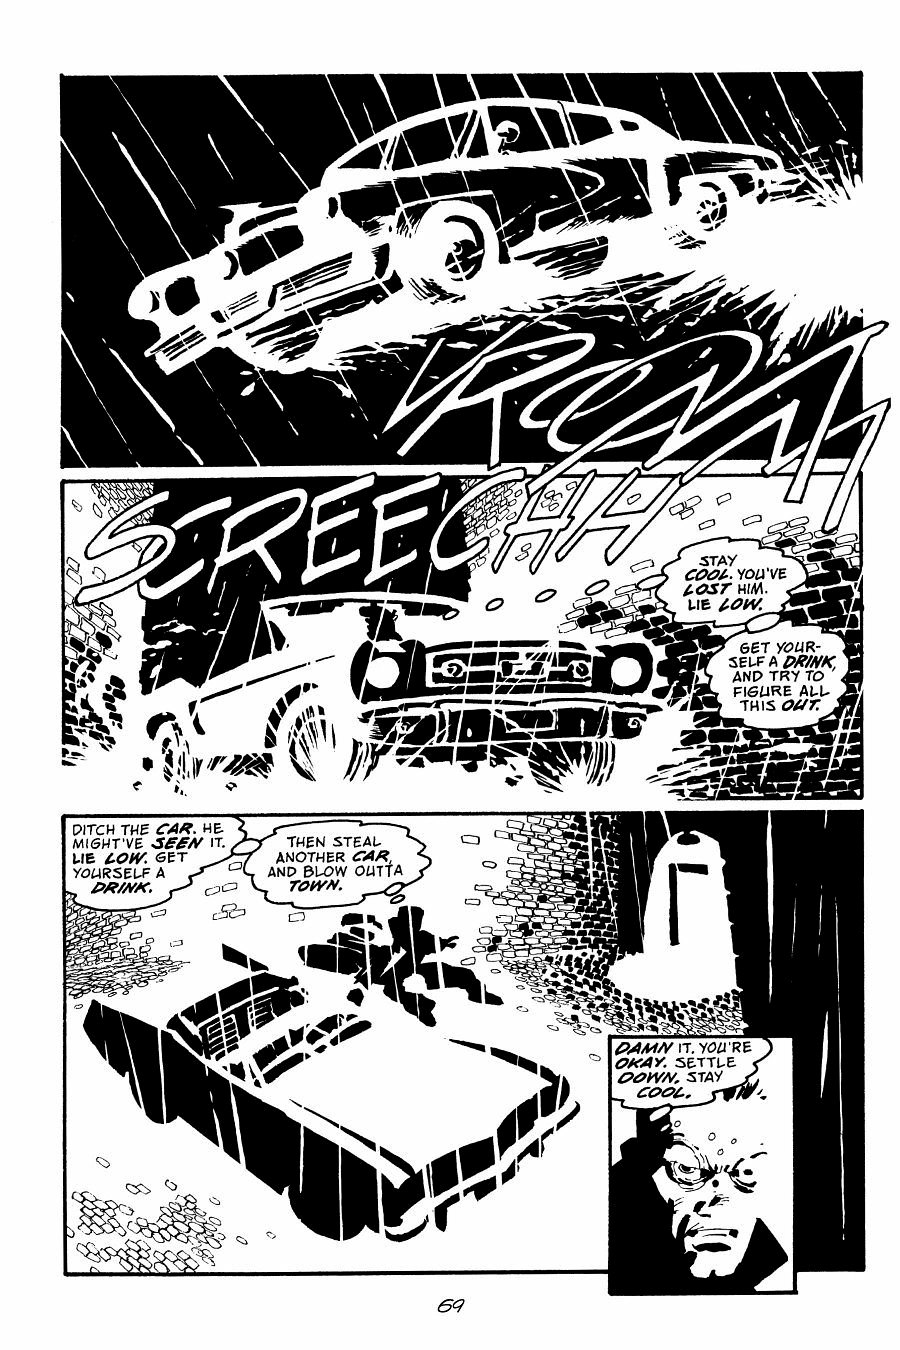 page 69 of sin city 6 booze broads and bullets